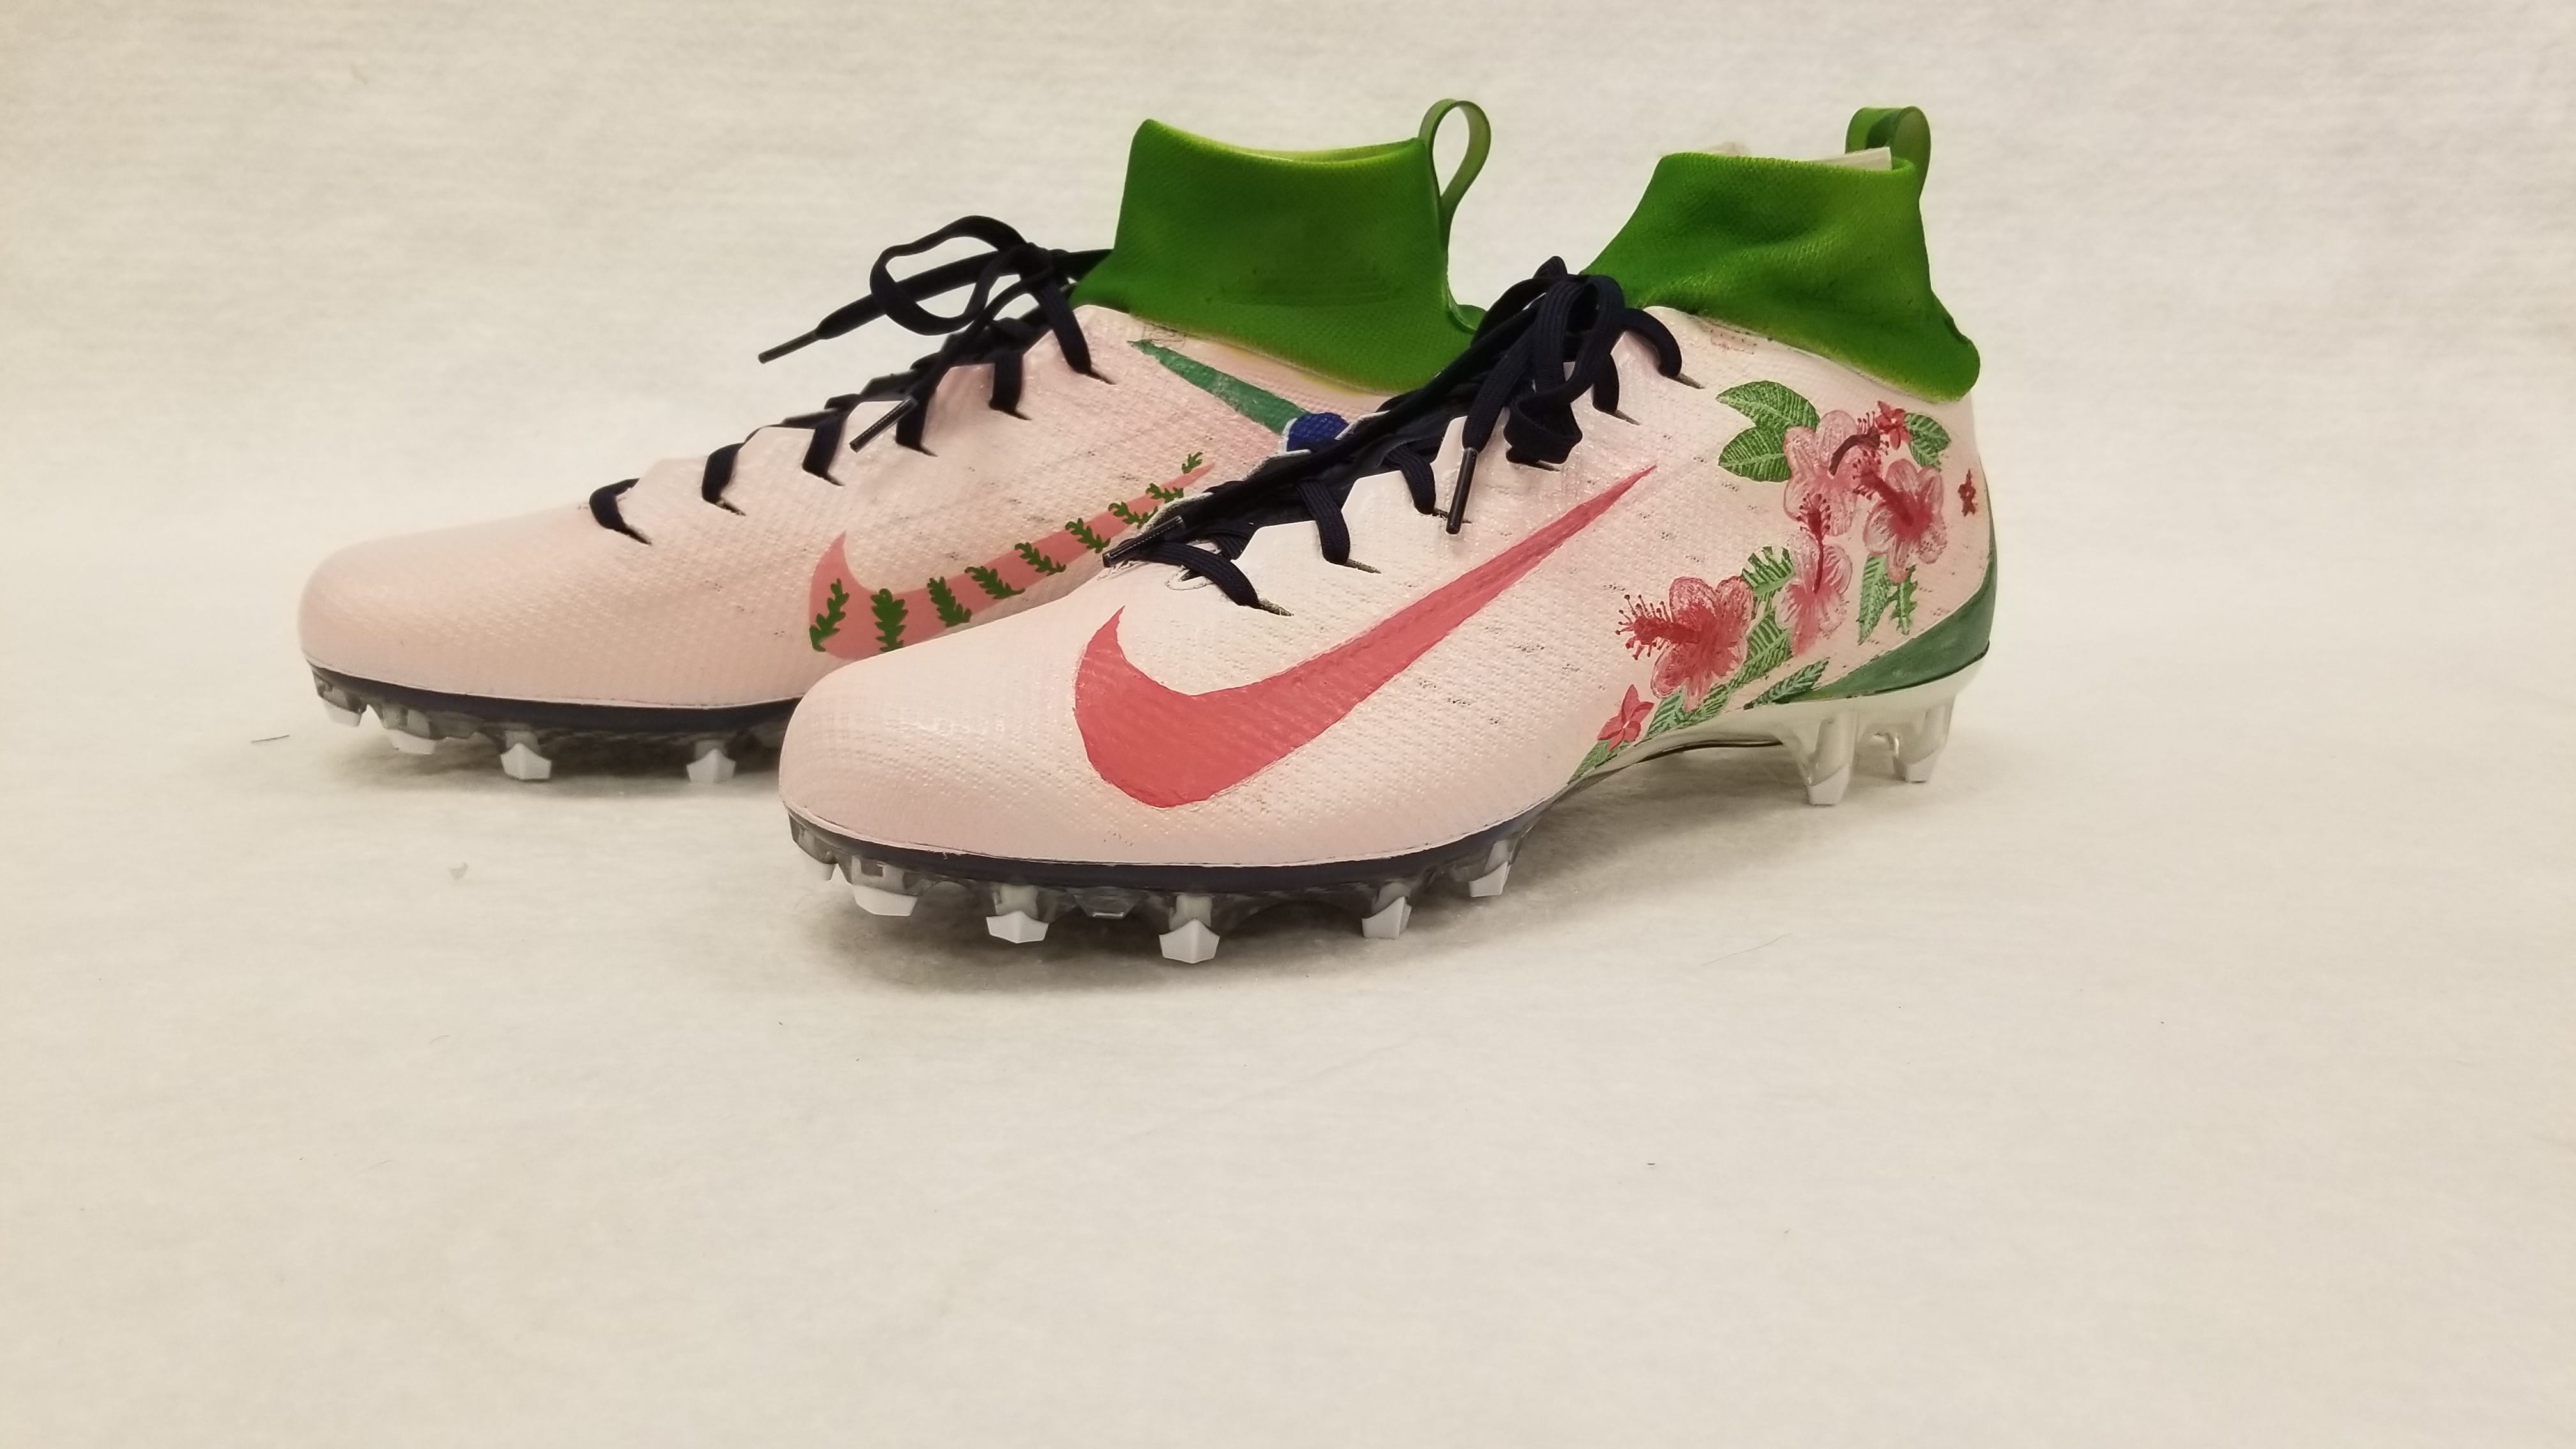 NFL quarterback Marcus Mariota's shoes, which he will wear during a Thursday Night Football game as part of an NFL charity event, were designed by King's Way freshman Olive Mohammadi. The design was a nod to Mariota's time Hawaiian roots.